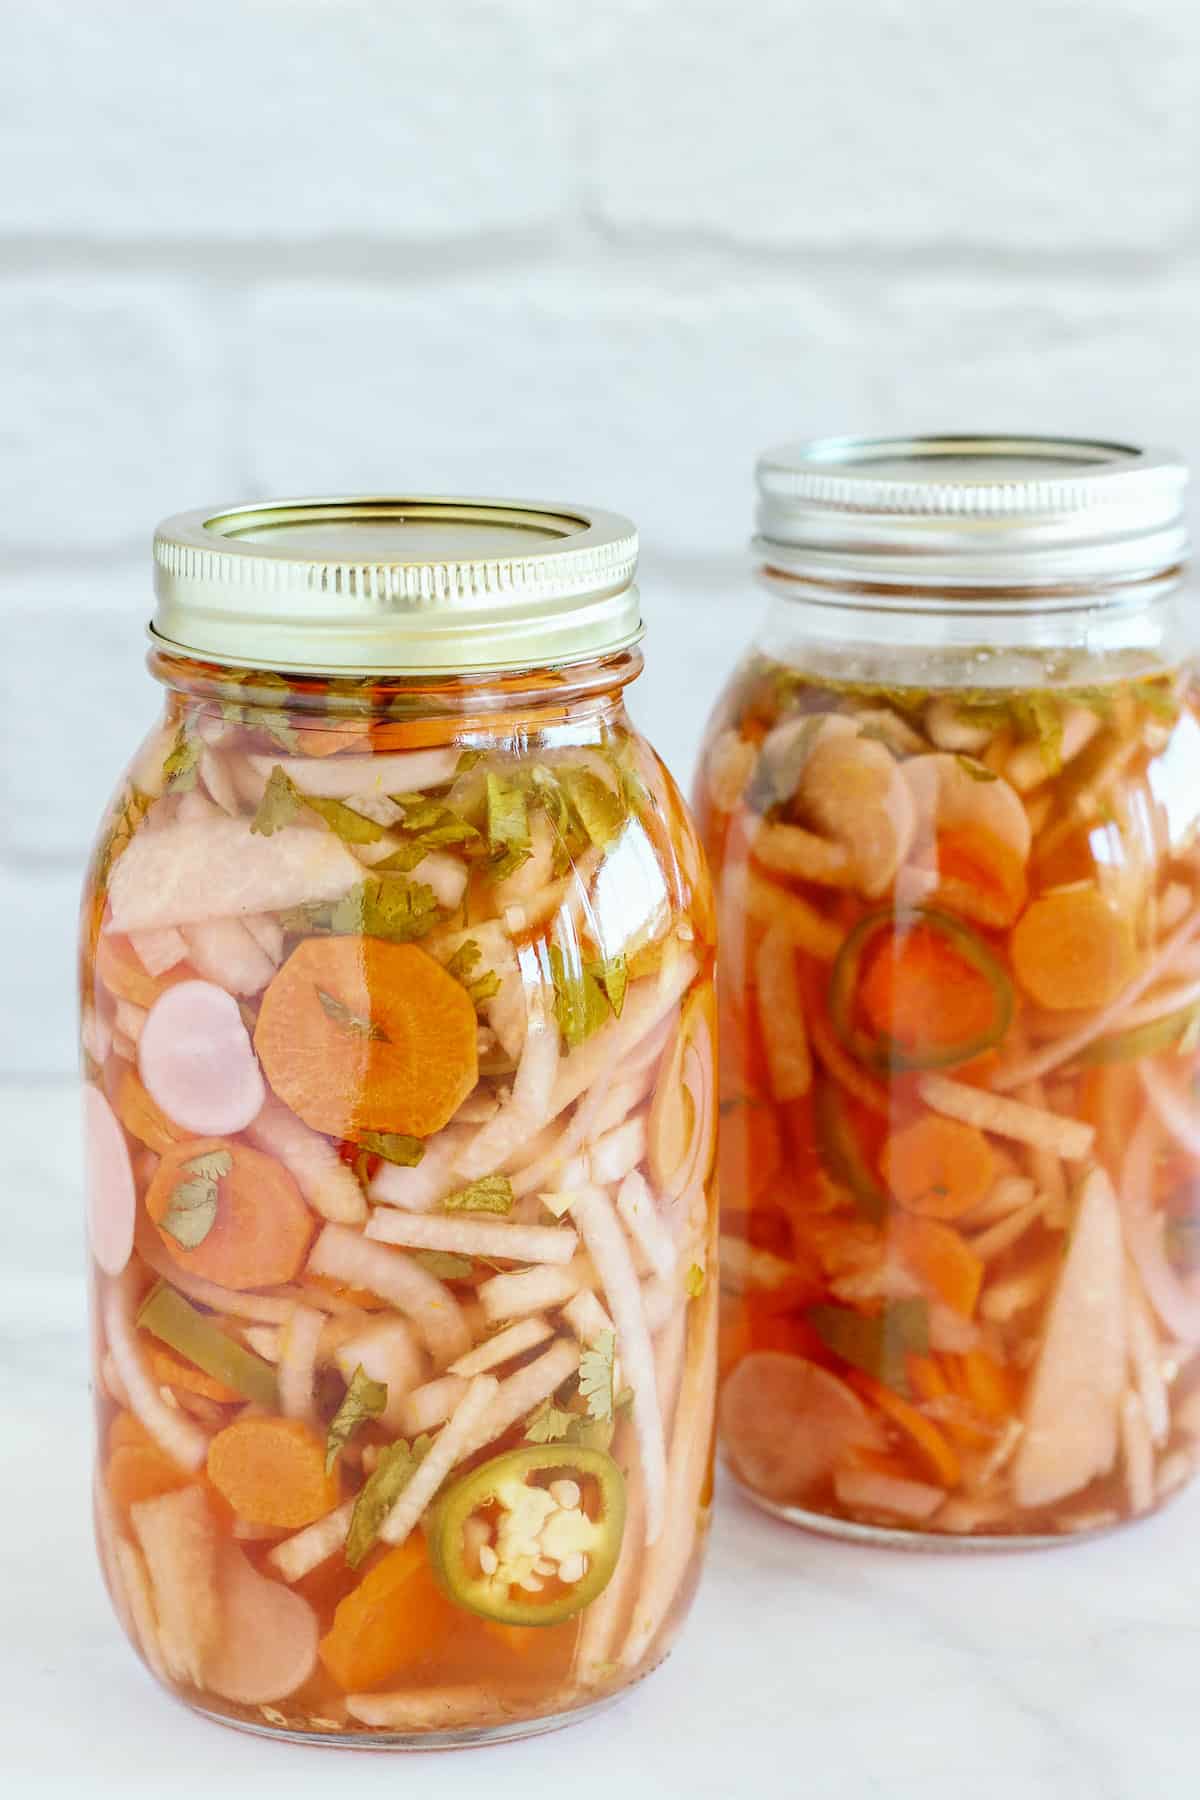 Two cans of mexican pickled vegetables.